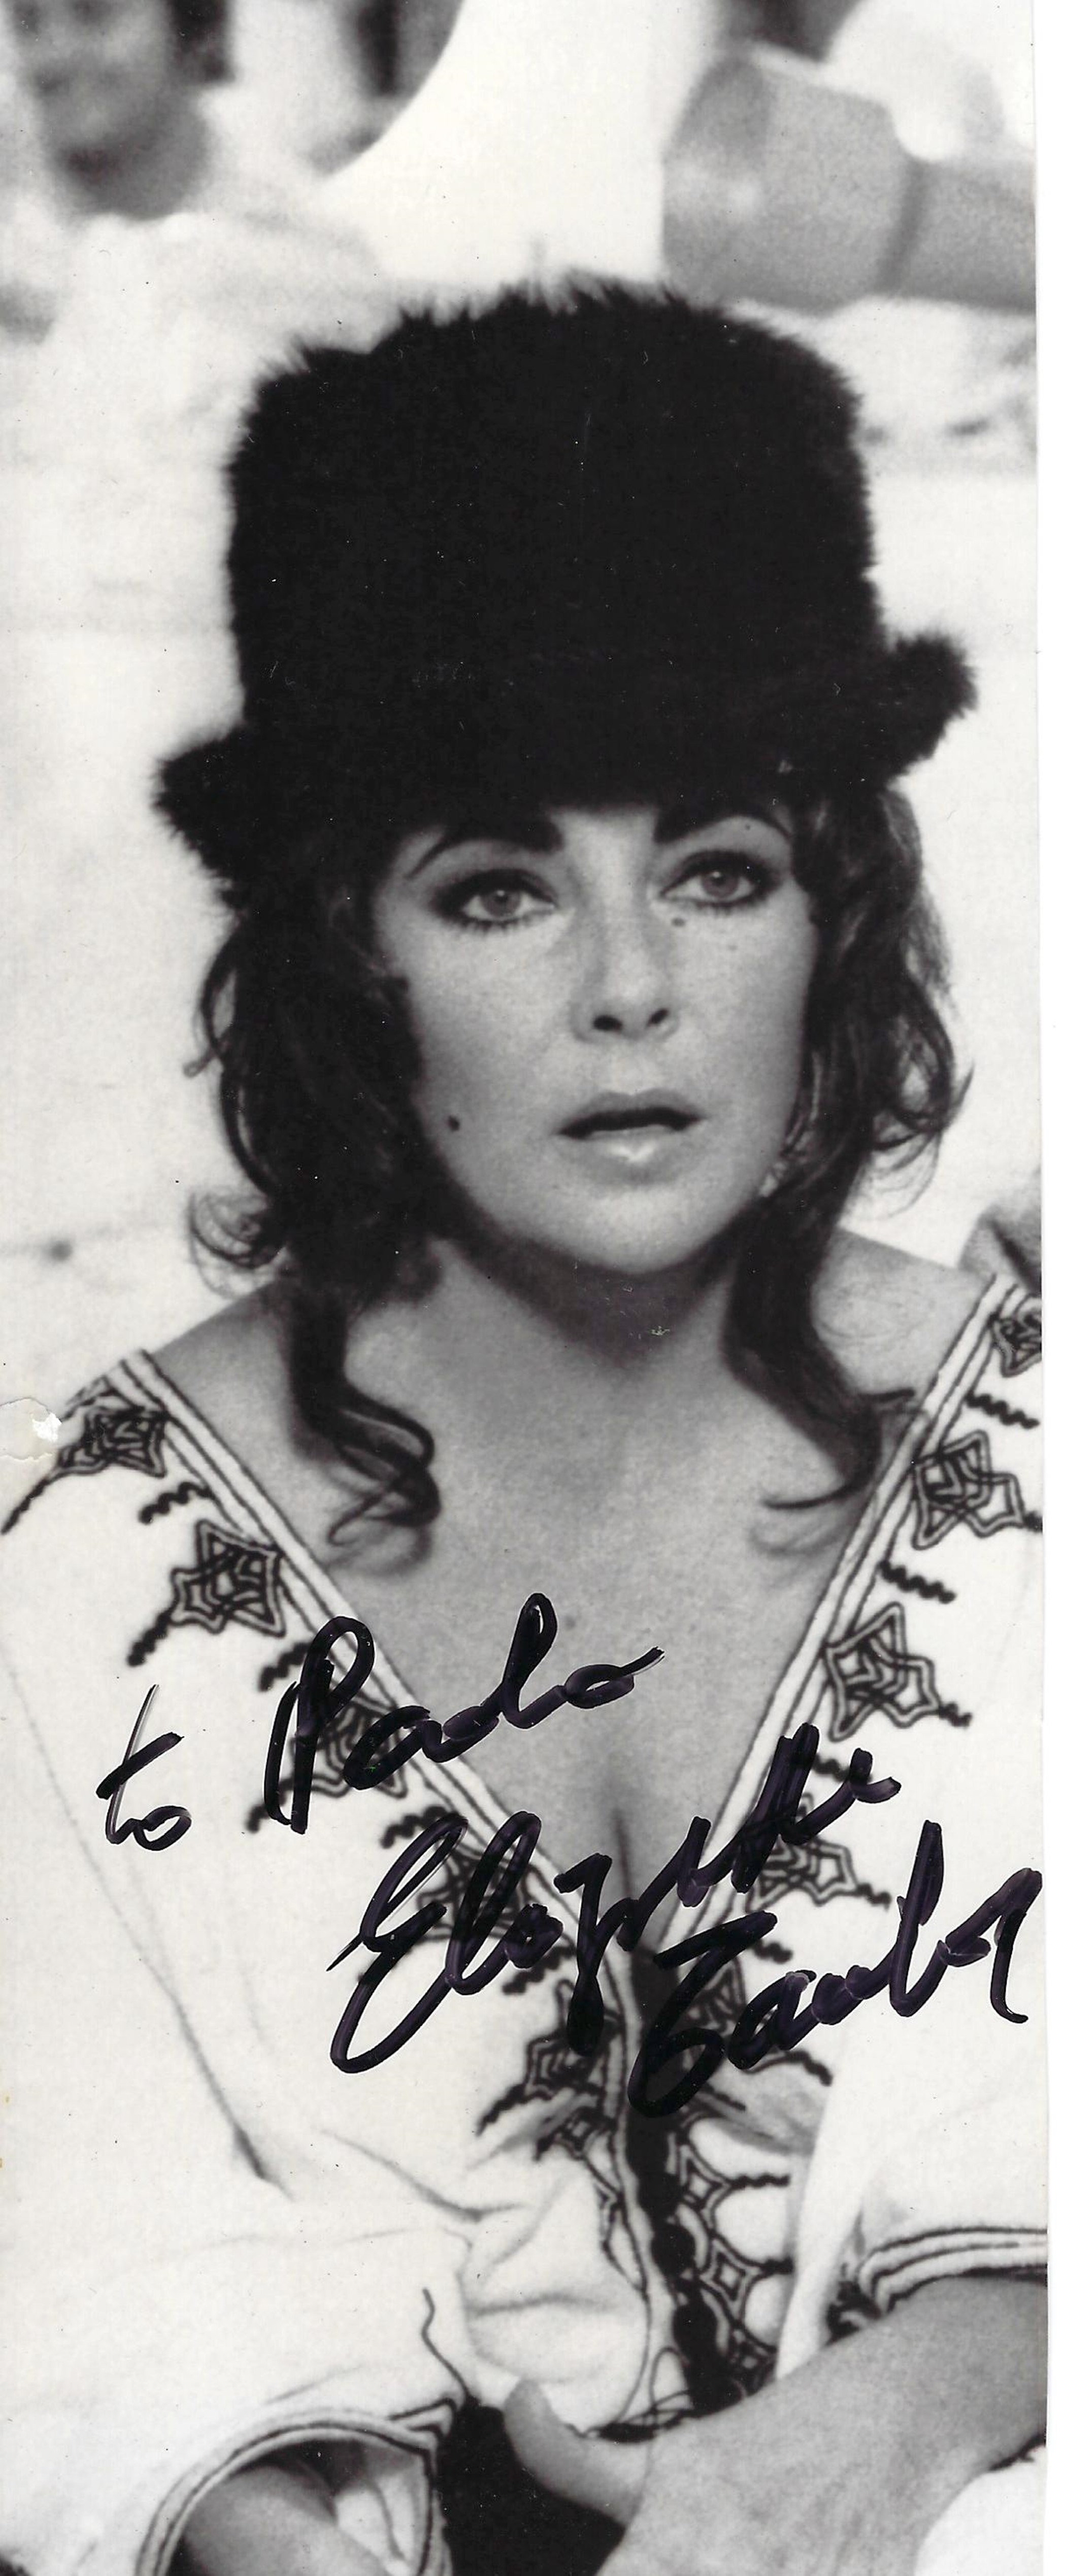 Elizabeth Taylor signed 10x4 black and white photograph dedicated and signed in black marker pen.